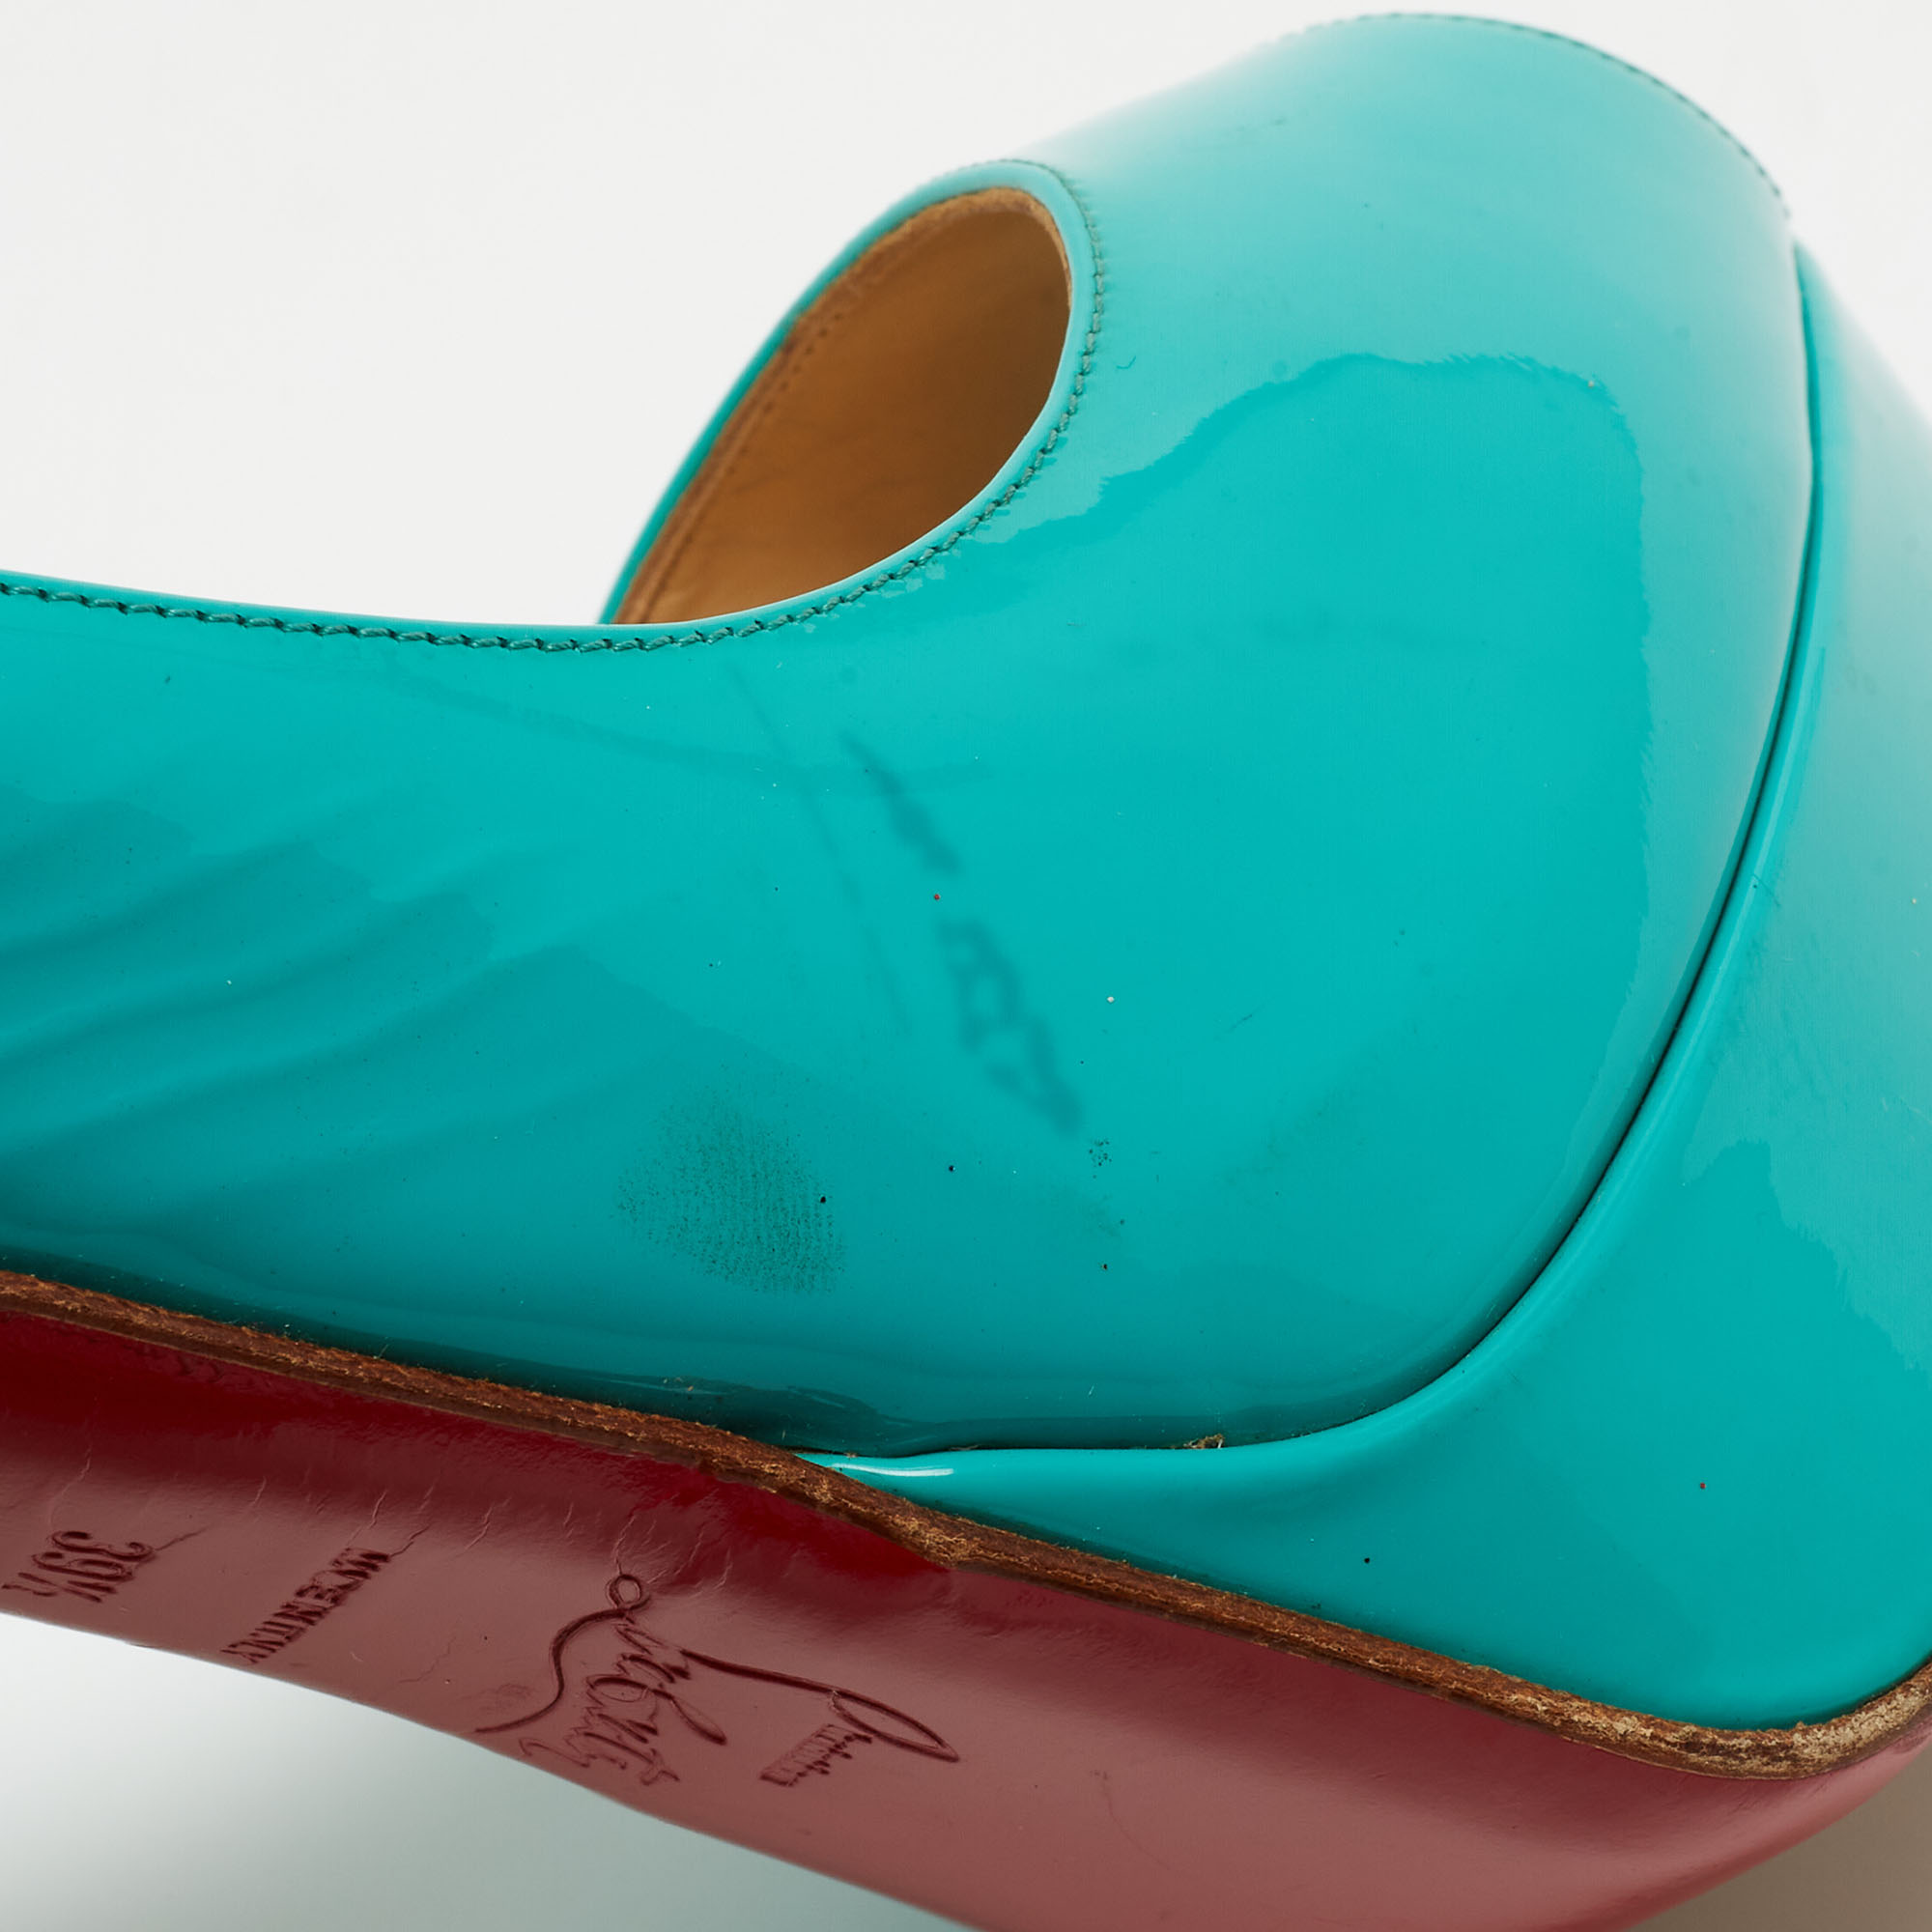 Christian Louboutin Turquoise Patent Leather Lady Peep Sling Pumps Size 39.5